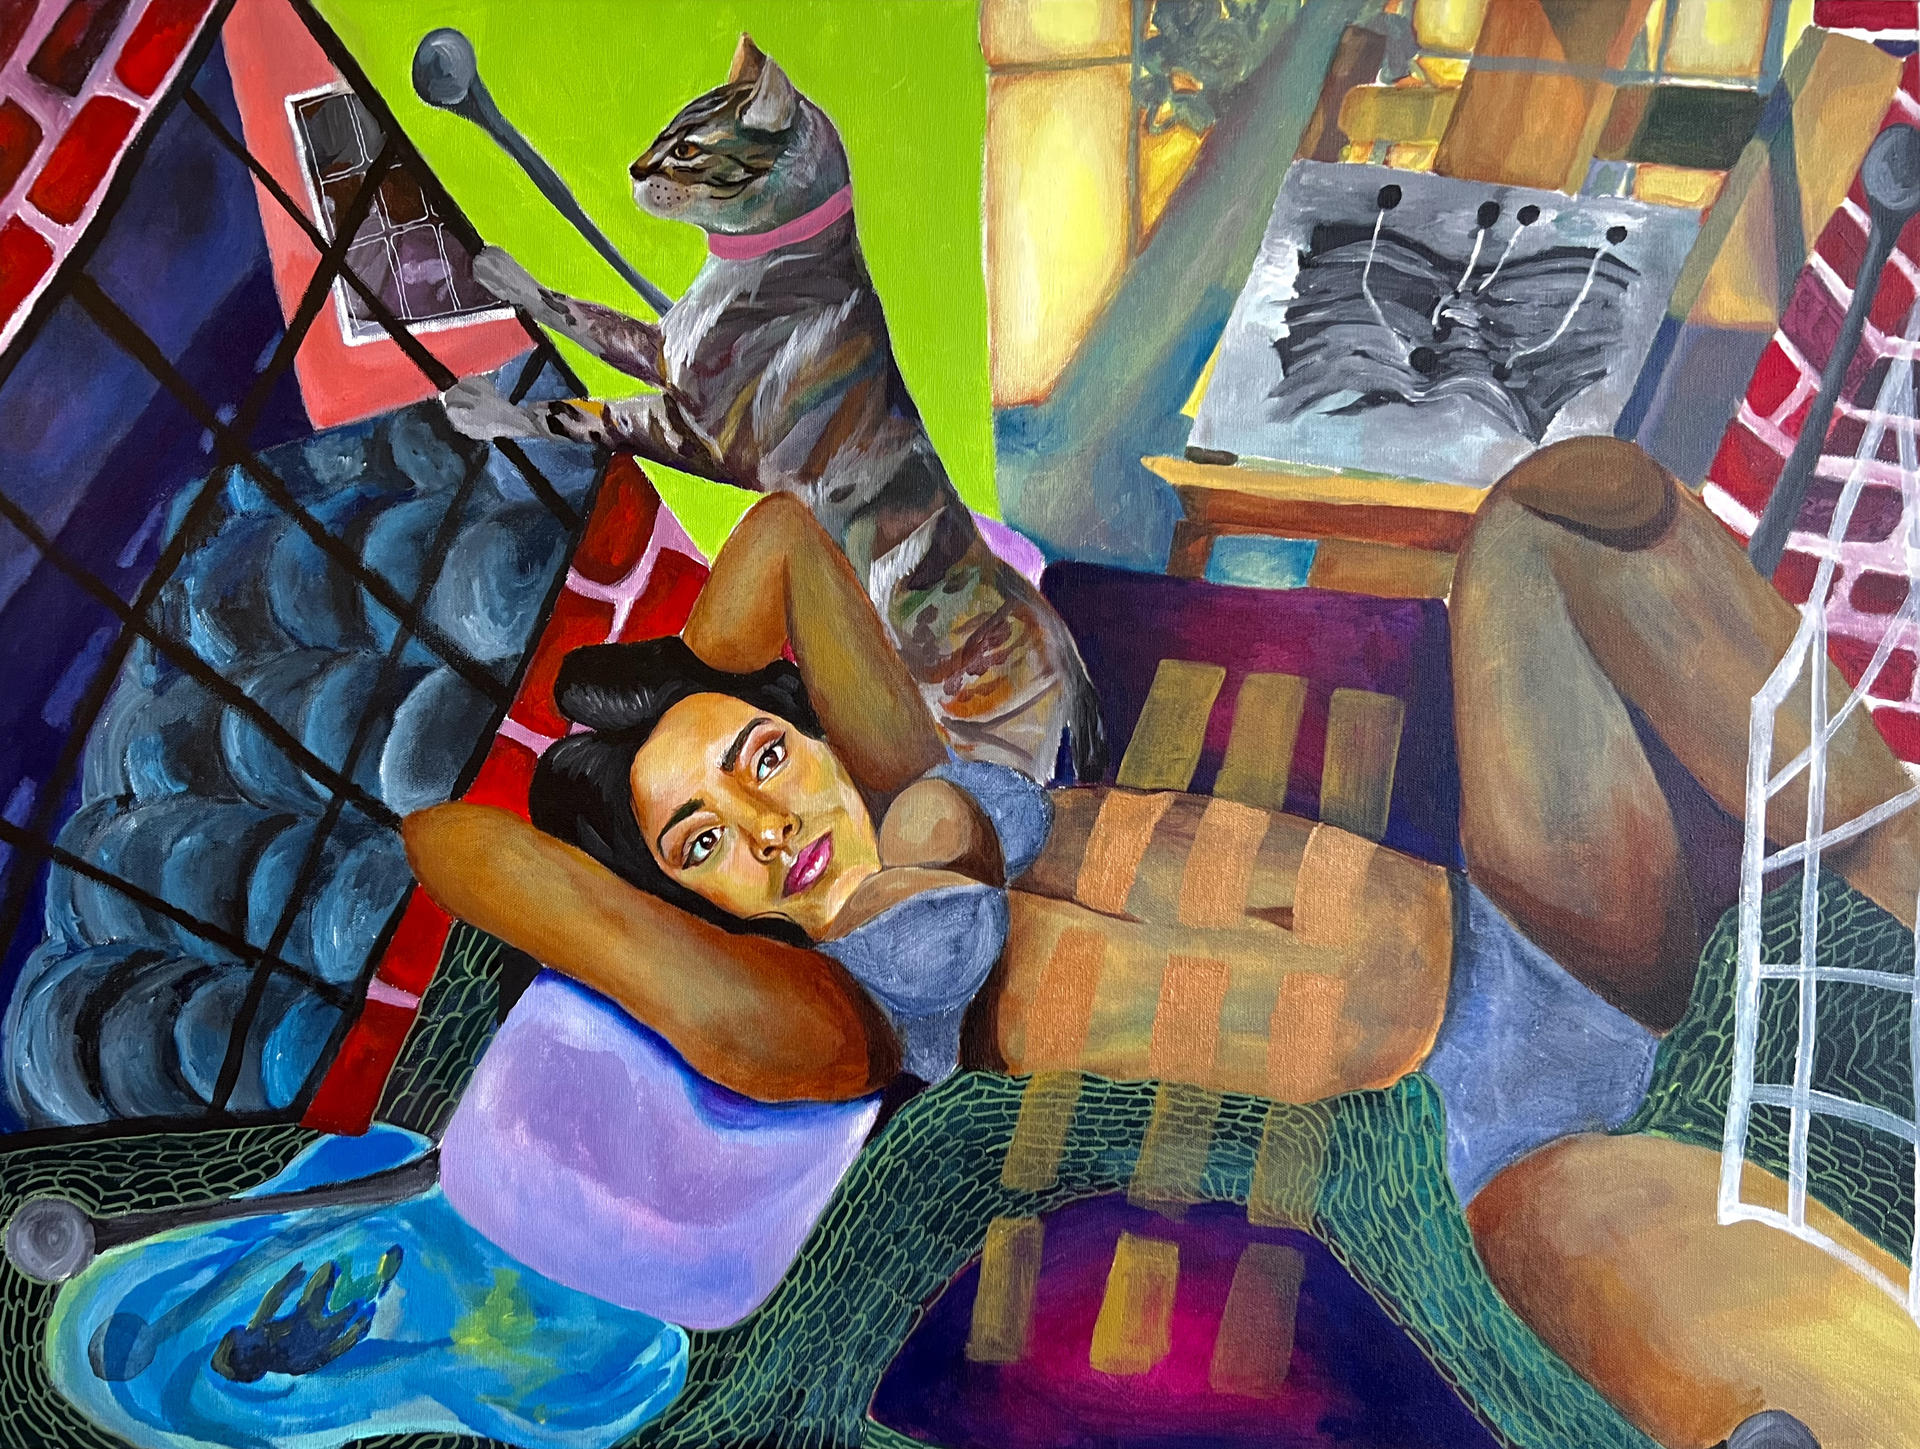 Acrylic painting of a woman and her cat on a bed, with ink drawing of projectiles emerging from hills in the background.